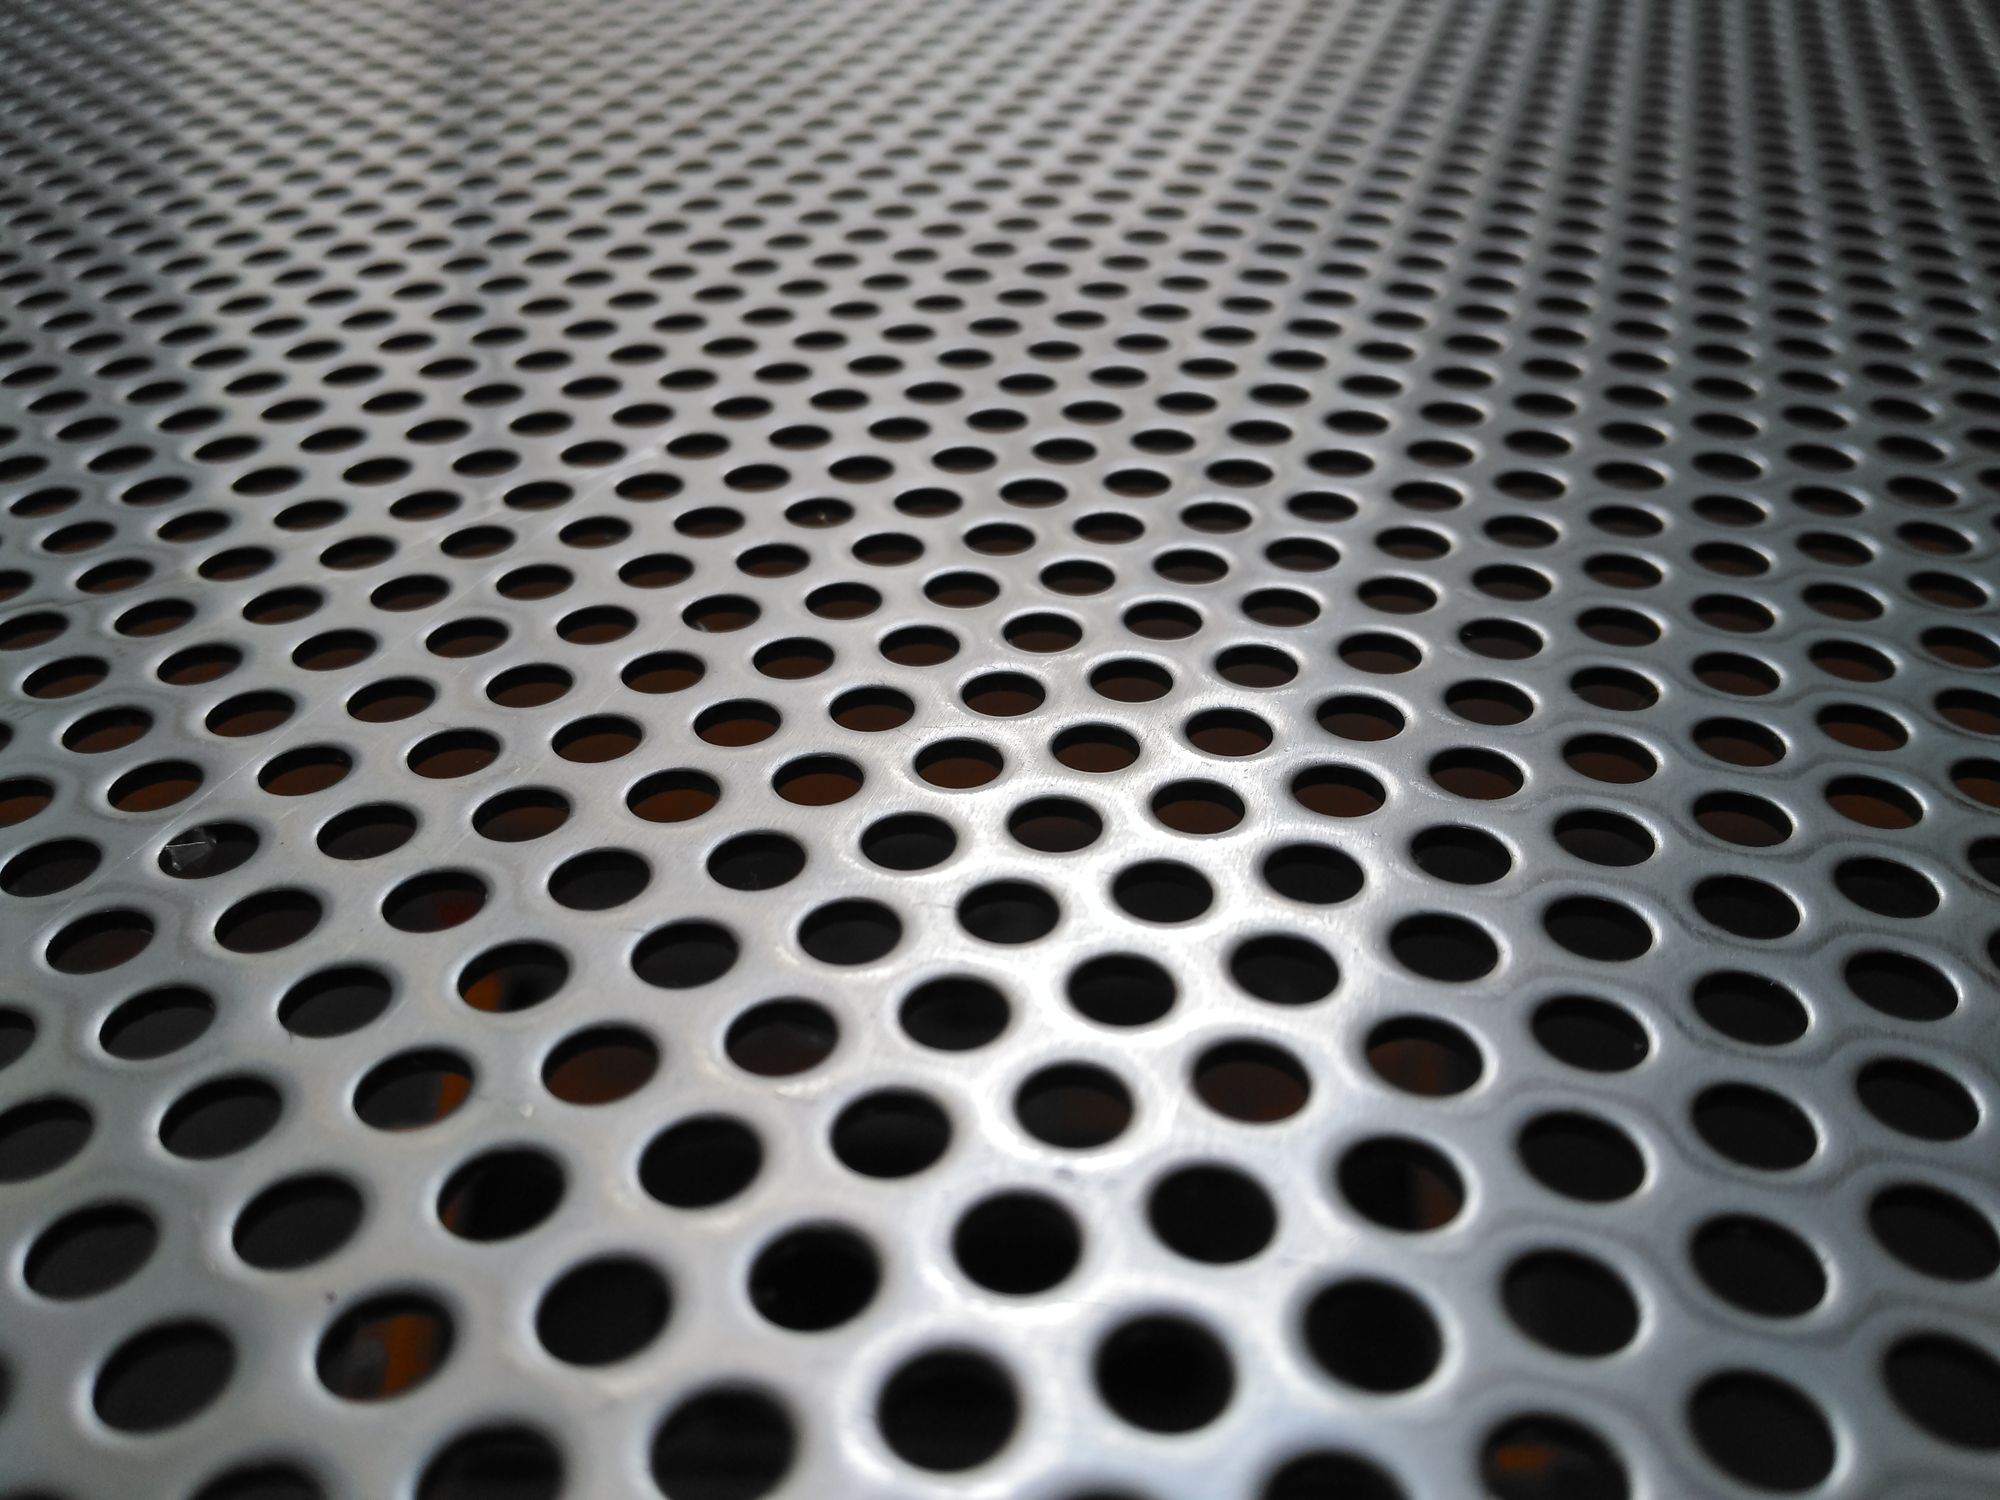 A close-up image of Stainless Steel Round Hole Perforated Metal.